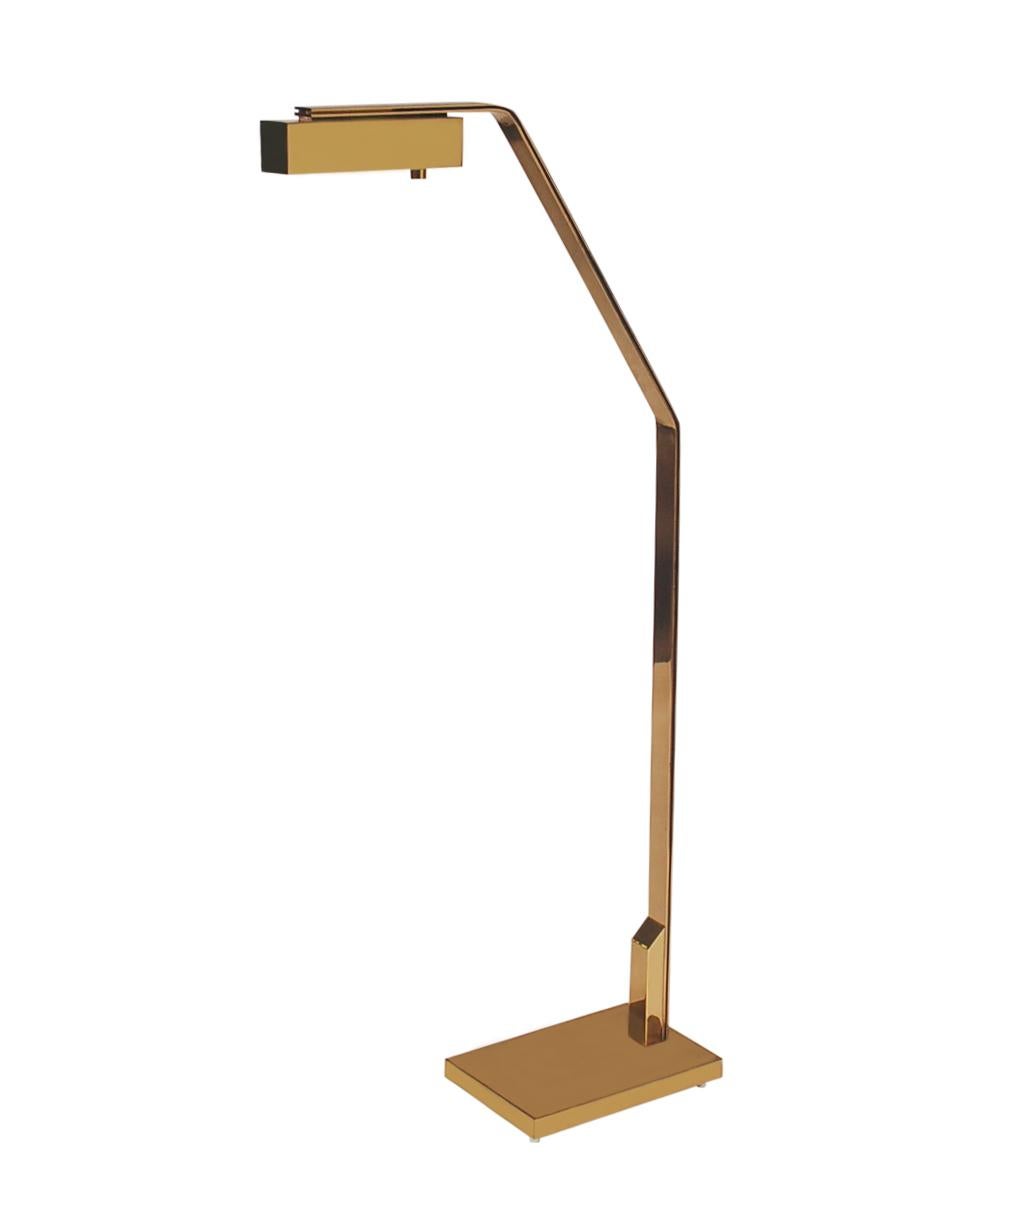 Late 20th Century Midcentury Italian Modern Polished Brass Reading Floor Lamp by Casella